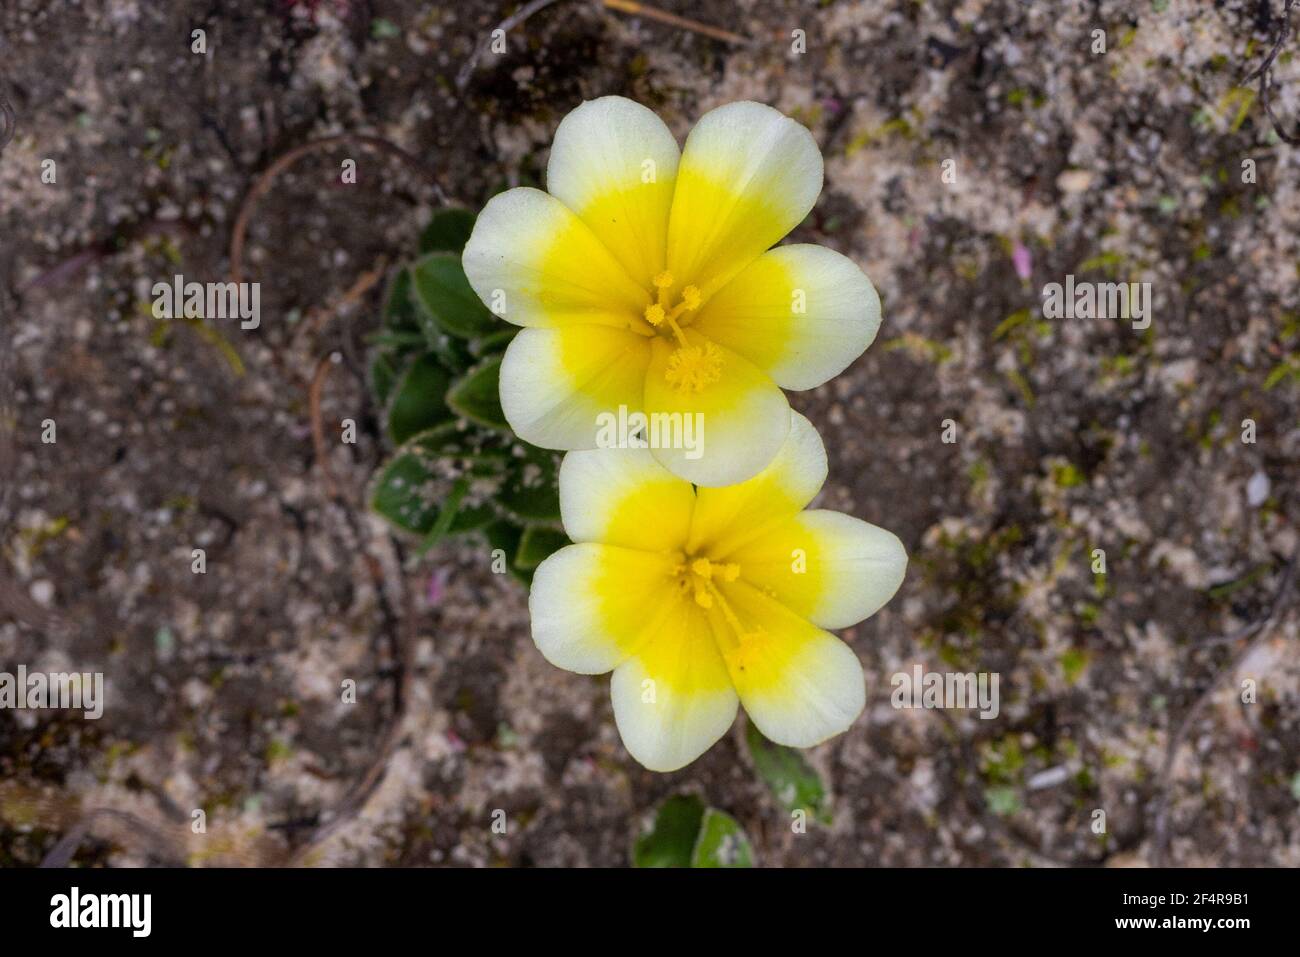 Two white and yellow flowers of the bulb Moraea luteoalba seen in the northern Cederberg in the Western Cape of South Africa Stock Photo